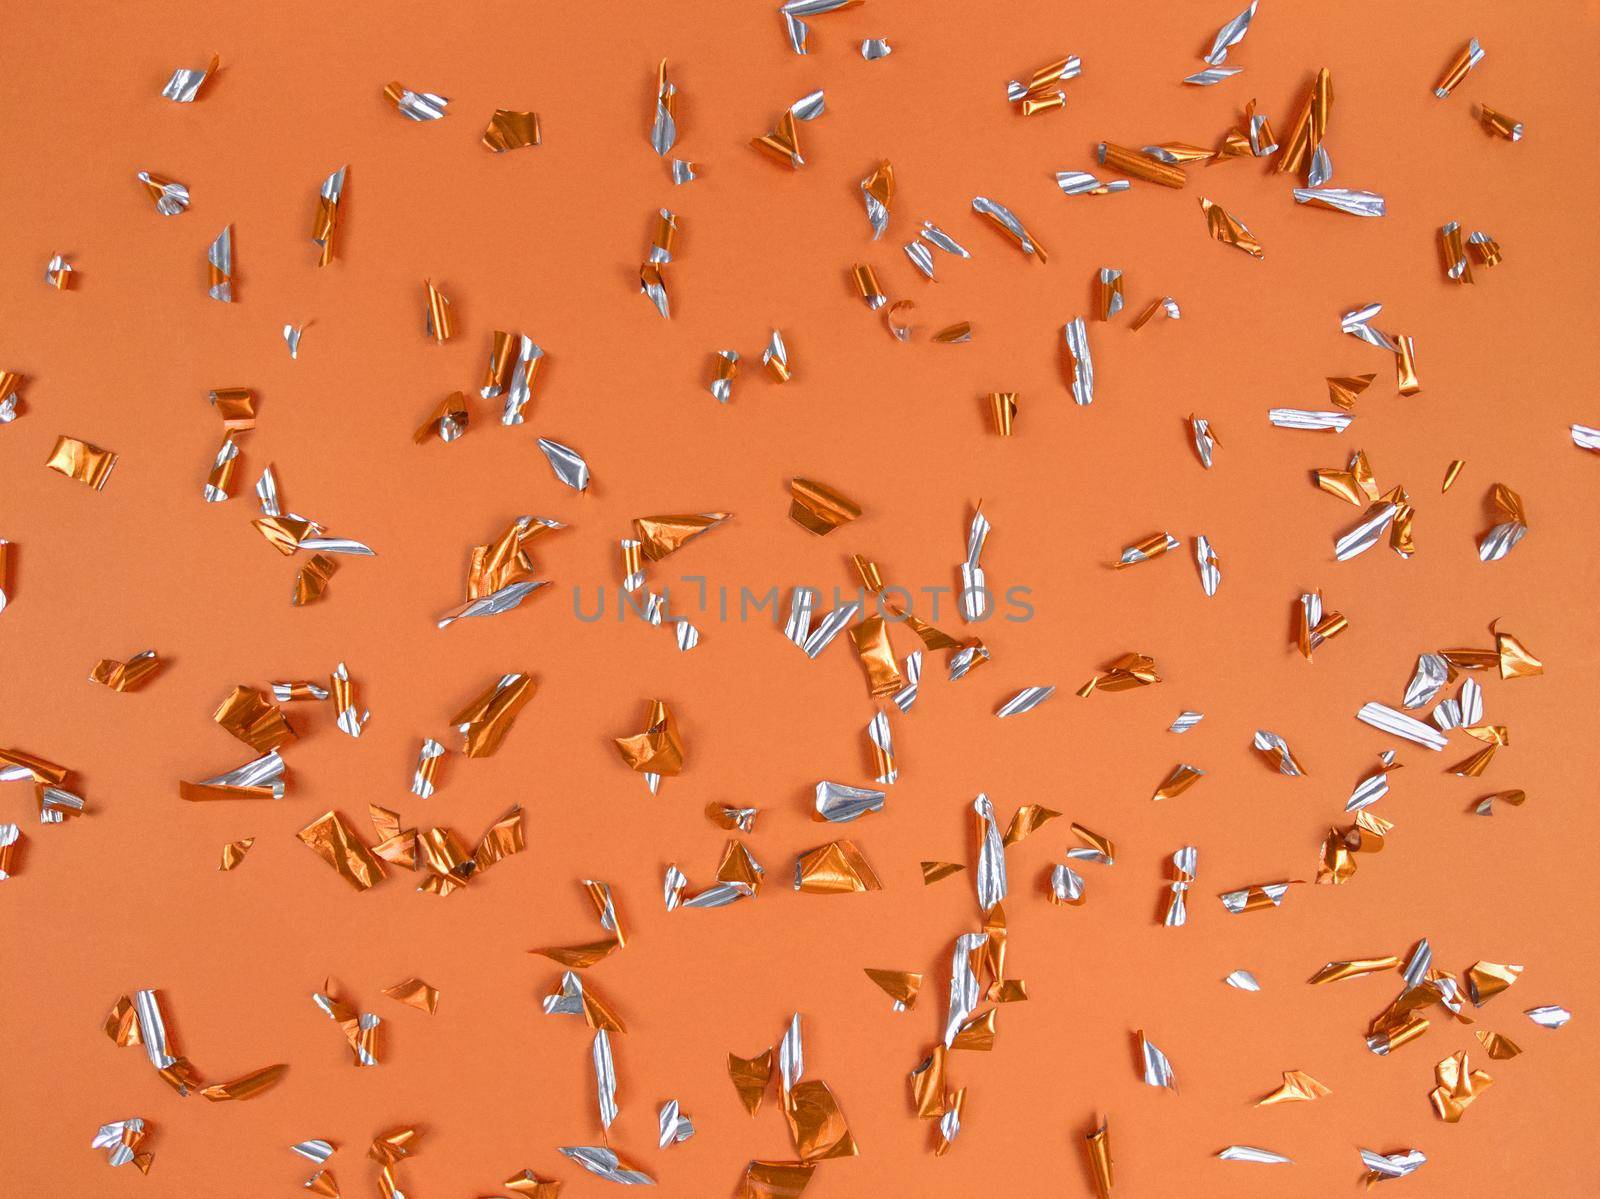 Confetti foil pieces on an orange background. Abstract festive backdrop.